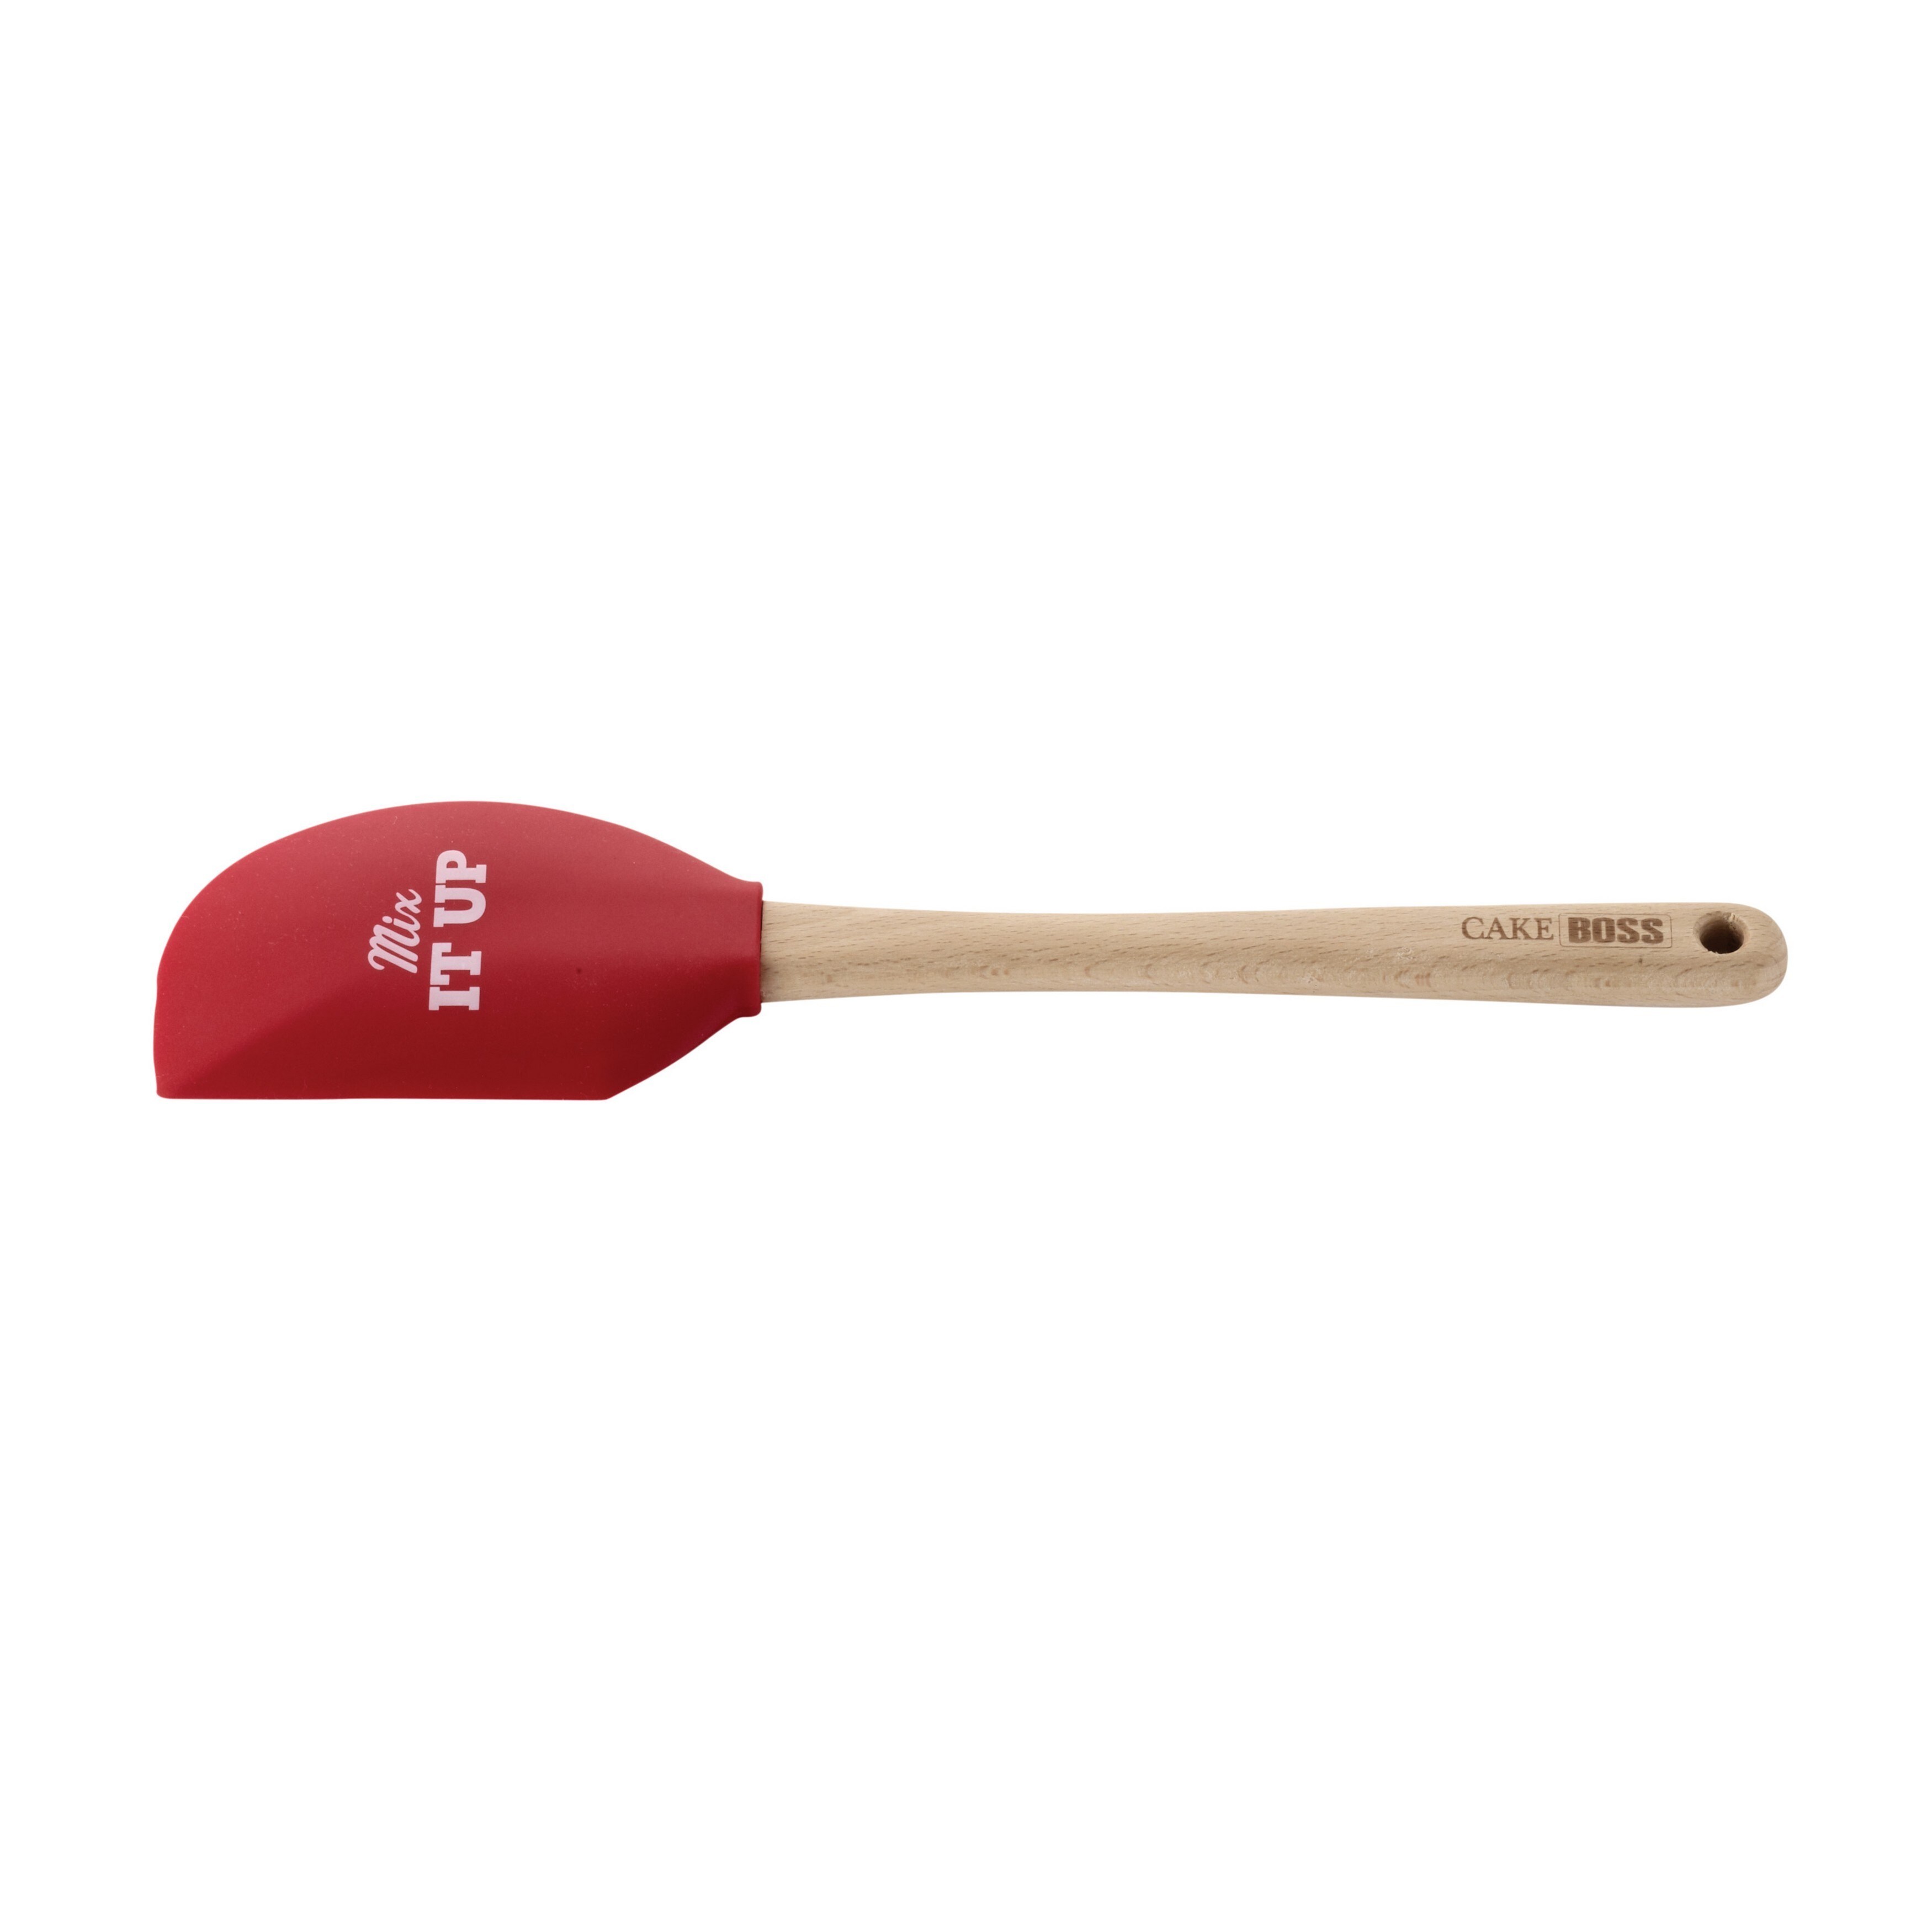 https://ak1.ostkcdn.com/images/products/9045456/Cake-Boss-Red-Mix-It-Up-Novelty-Tools-11.5-Silicone-Scraping-Spatula-1fbfe4c8-6e08-4b7b-862f-cfdd597618ac.jpg